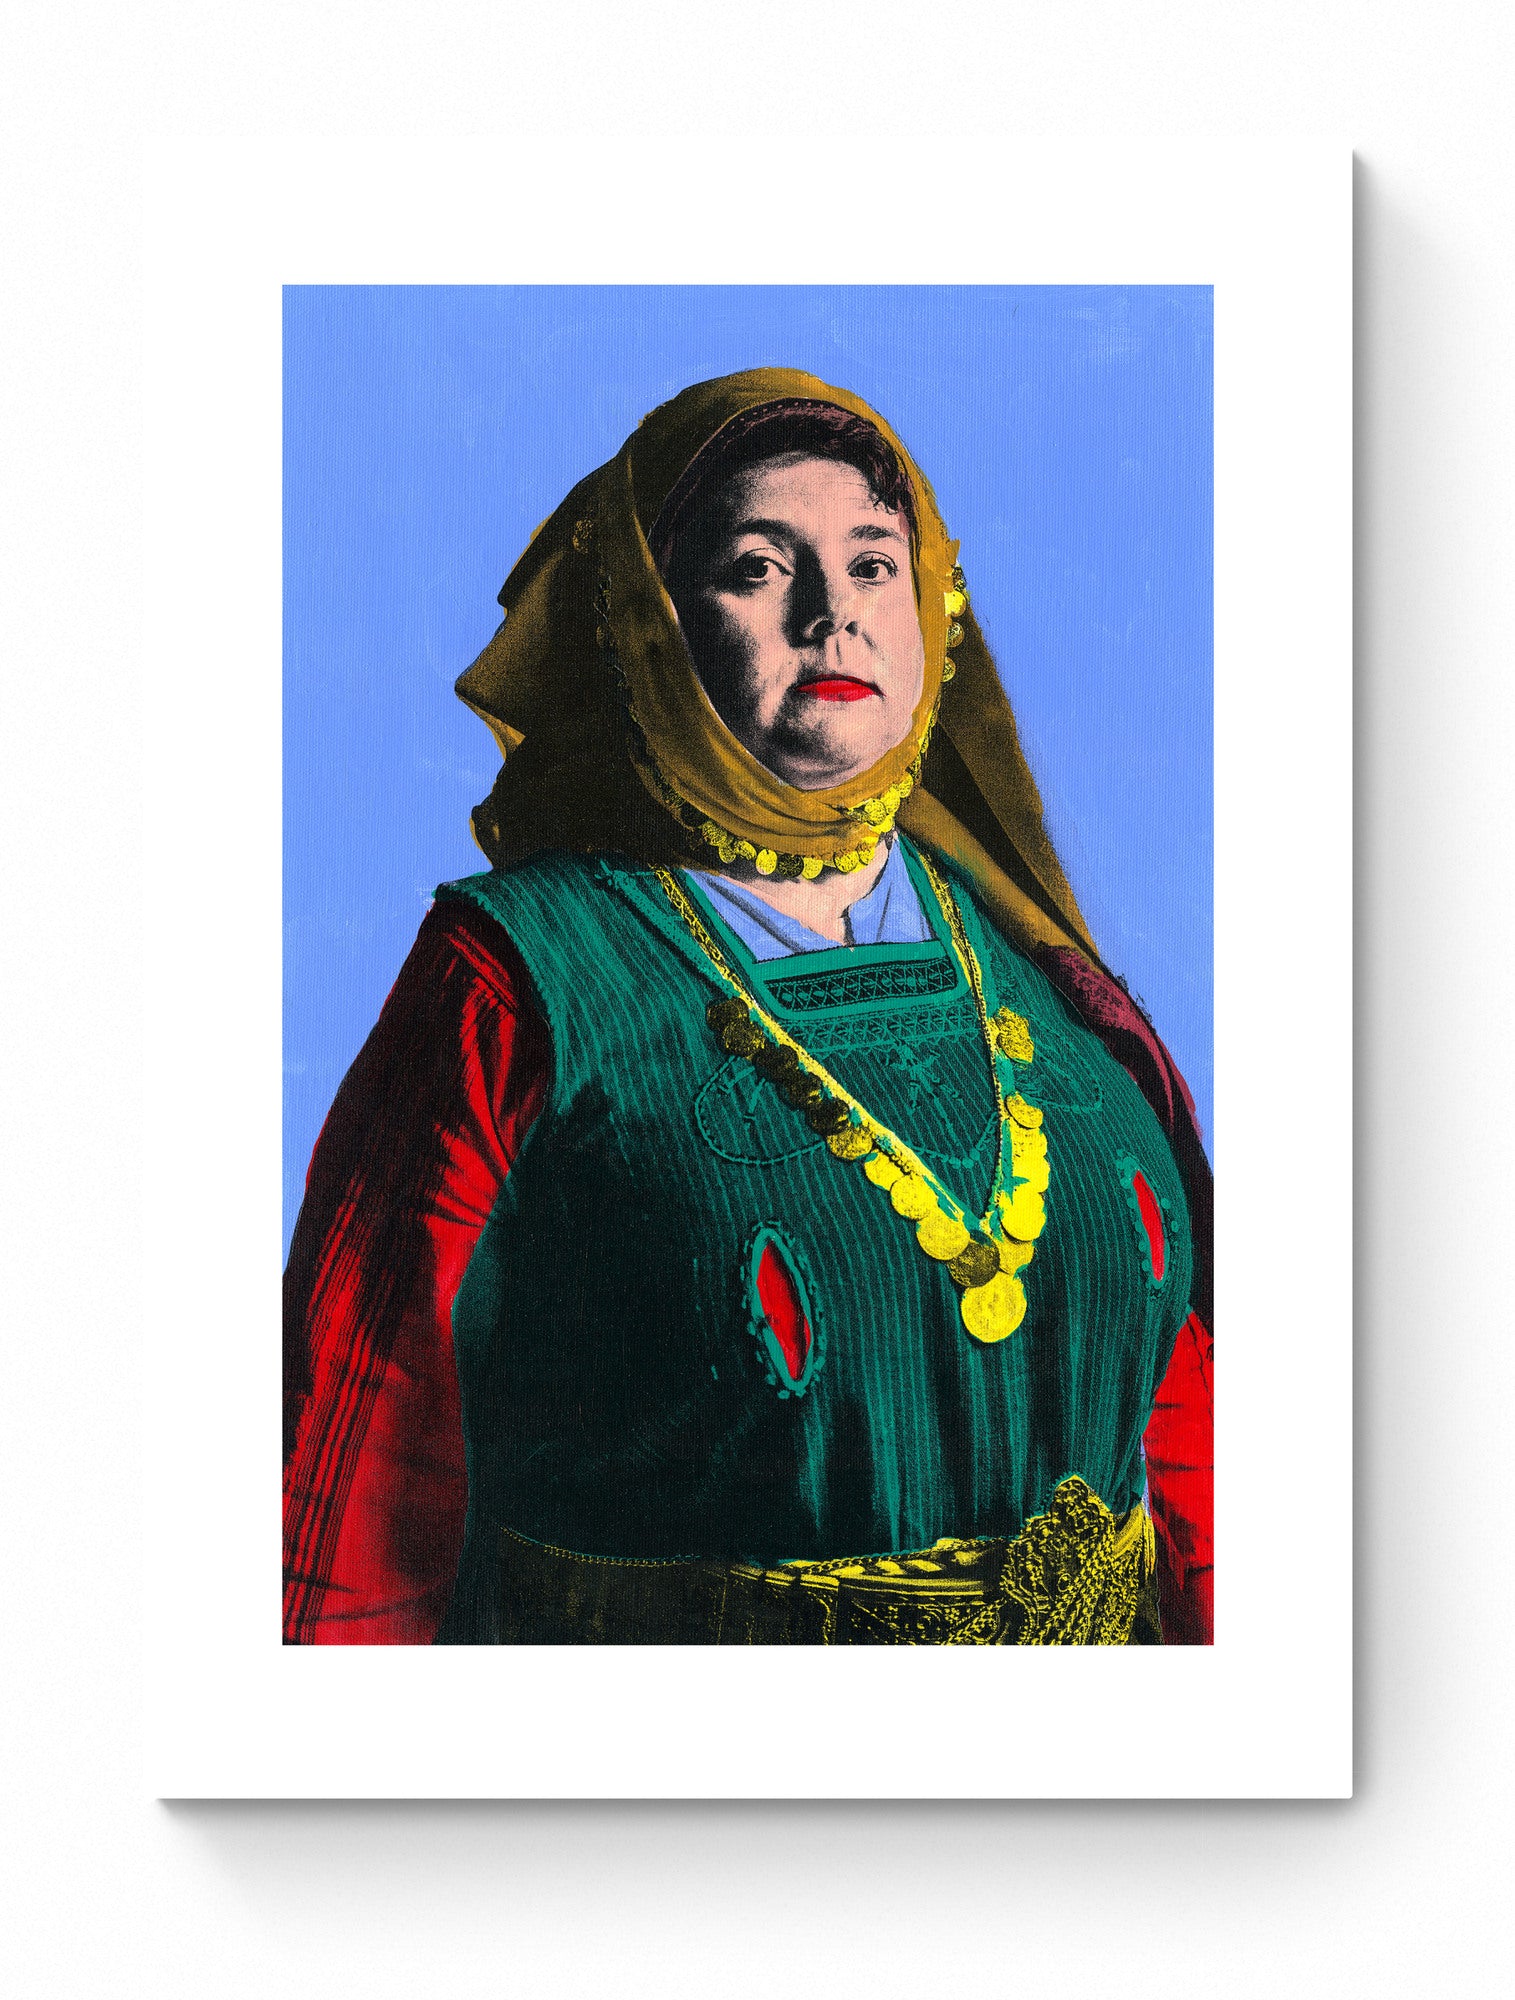 Painting Pop Art Wall Art from Greece | Red Green Metaxades Costume from Evros, Thrace, by George Tatakis - poster